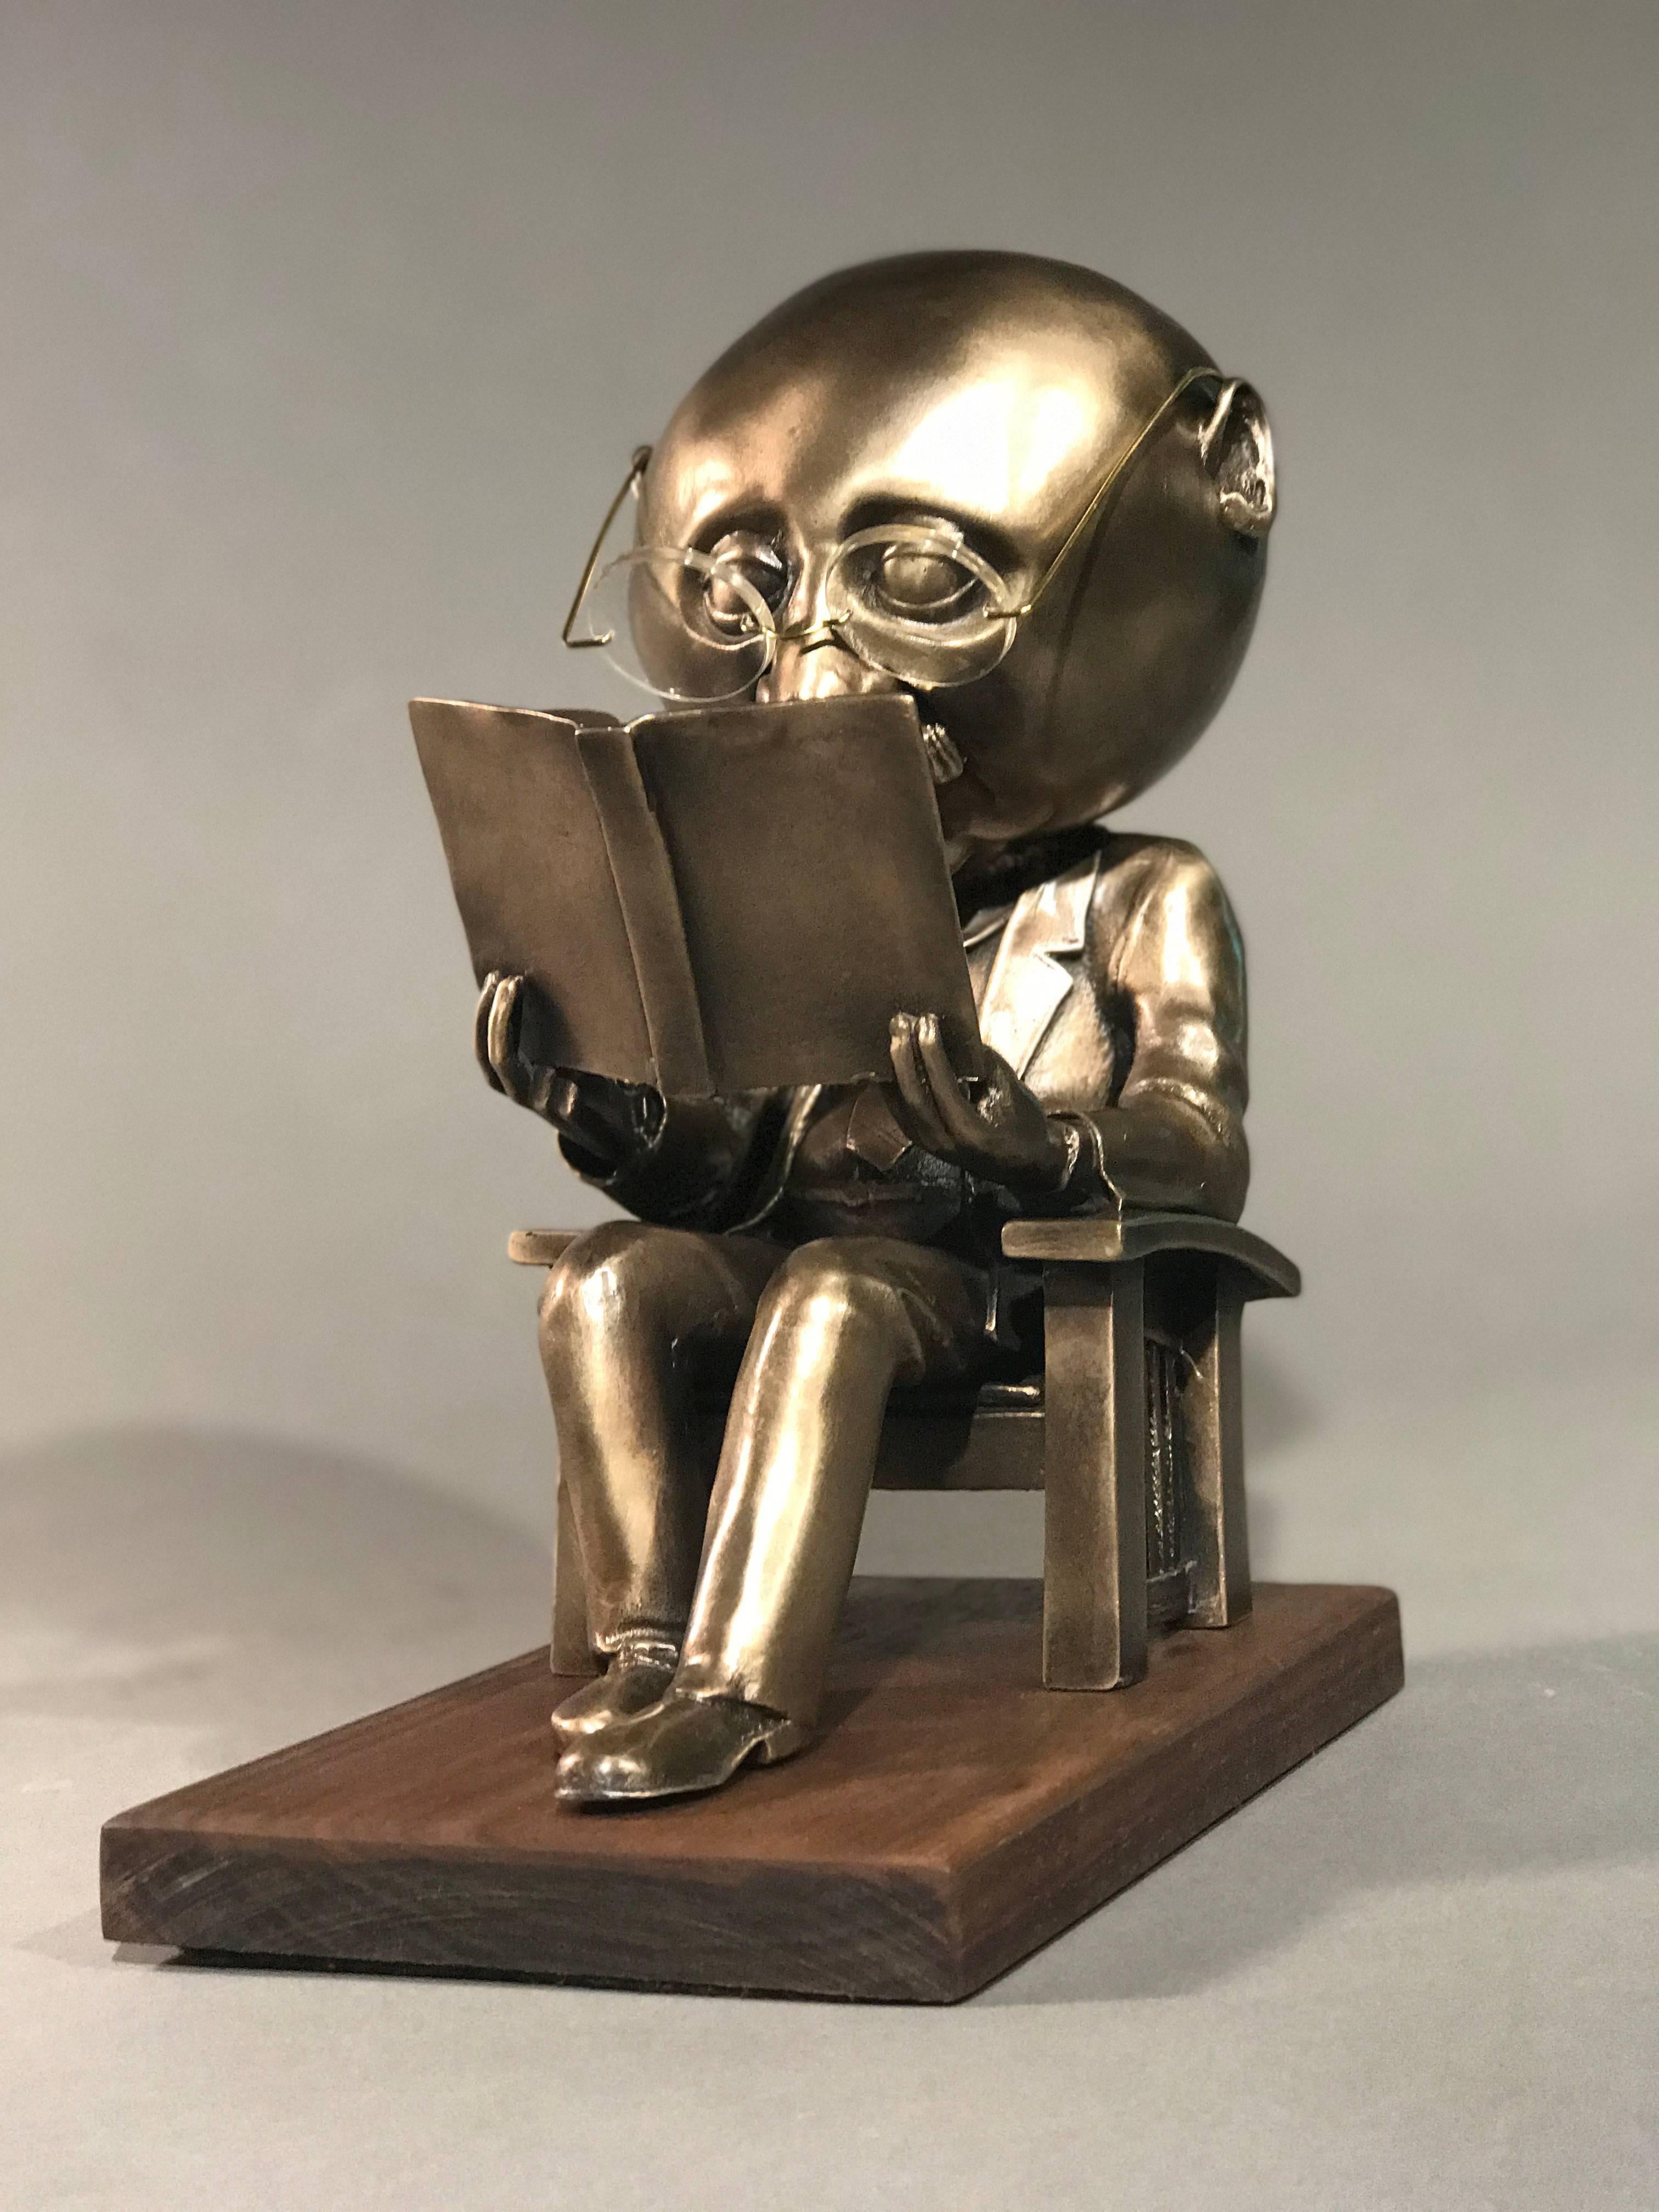 The Reader (small), gold bronze sculpture, reading book, glasses,Rodger Jacobsen

registered, numbered, edition 100

University of Tulsa Library has one of the larger sculptures in its permanent collection.

A well-known sculptor, Jacobsen has